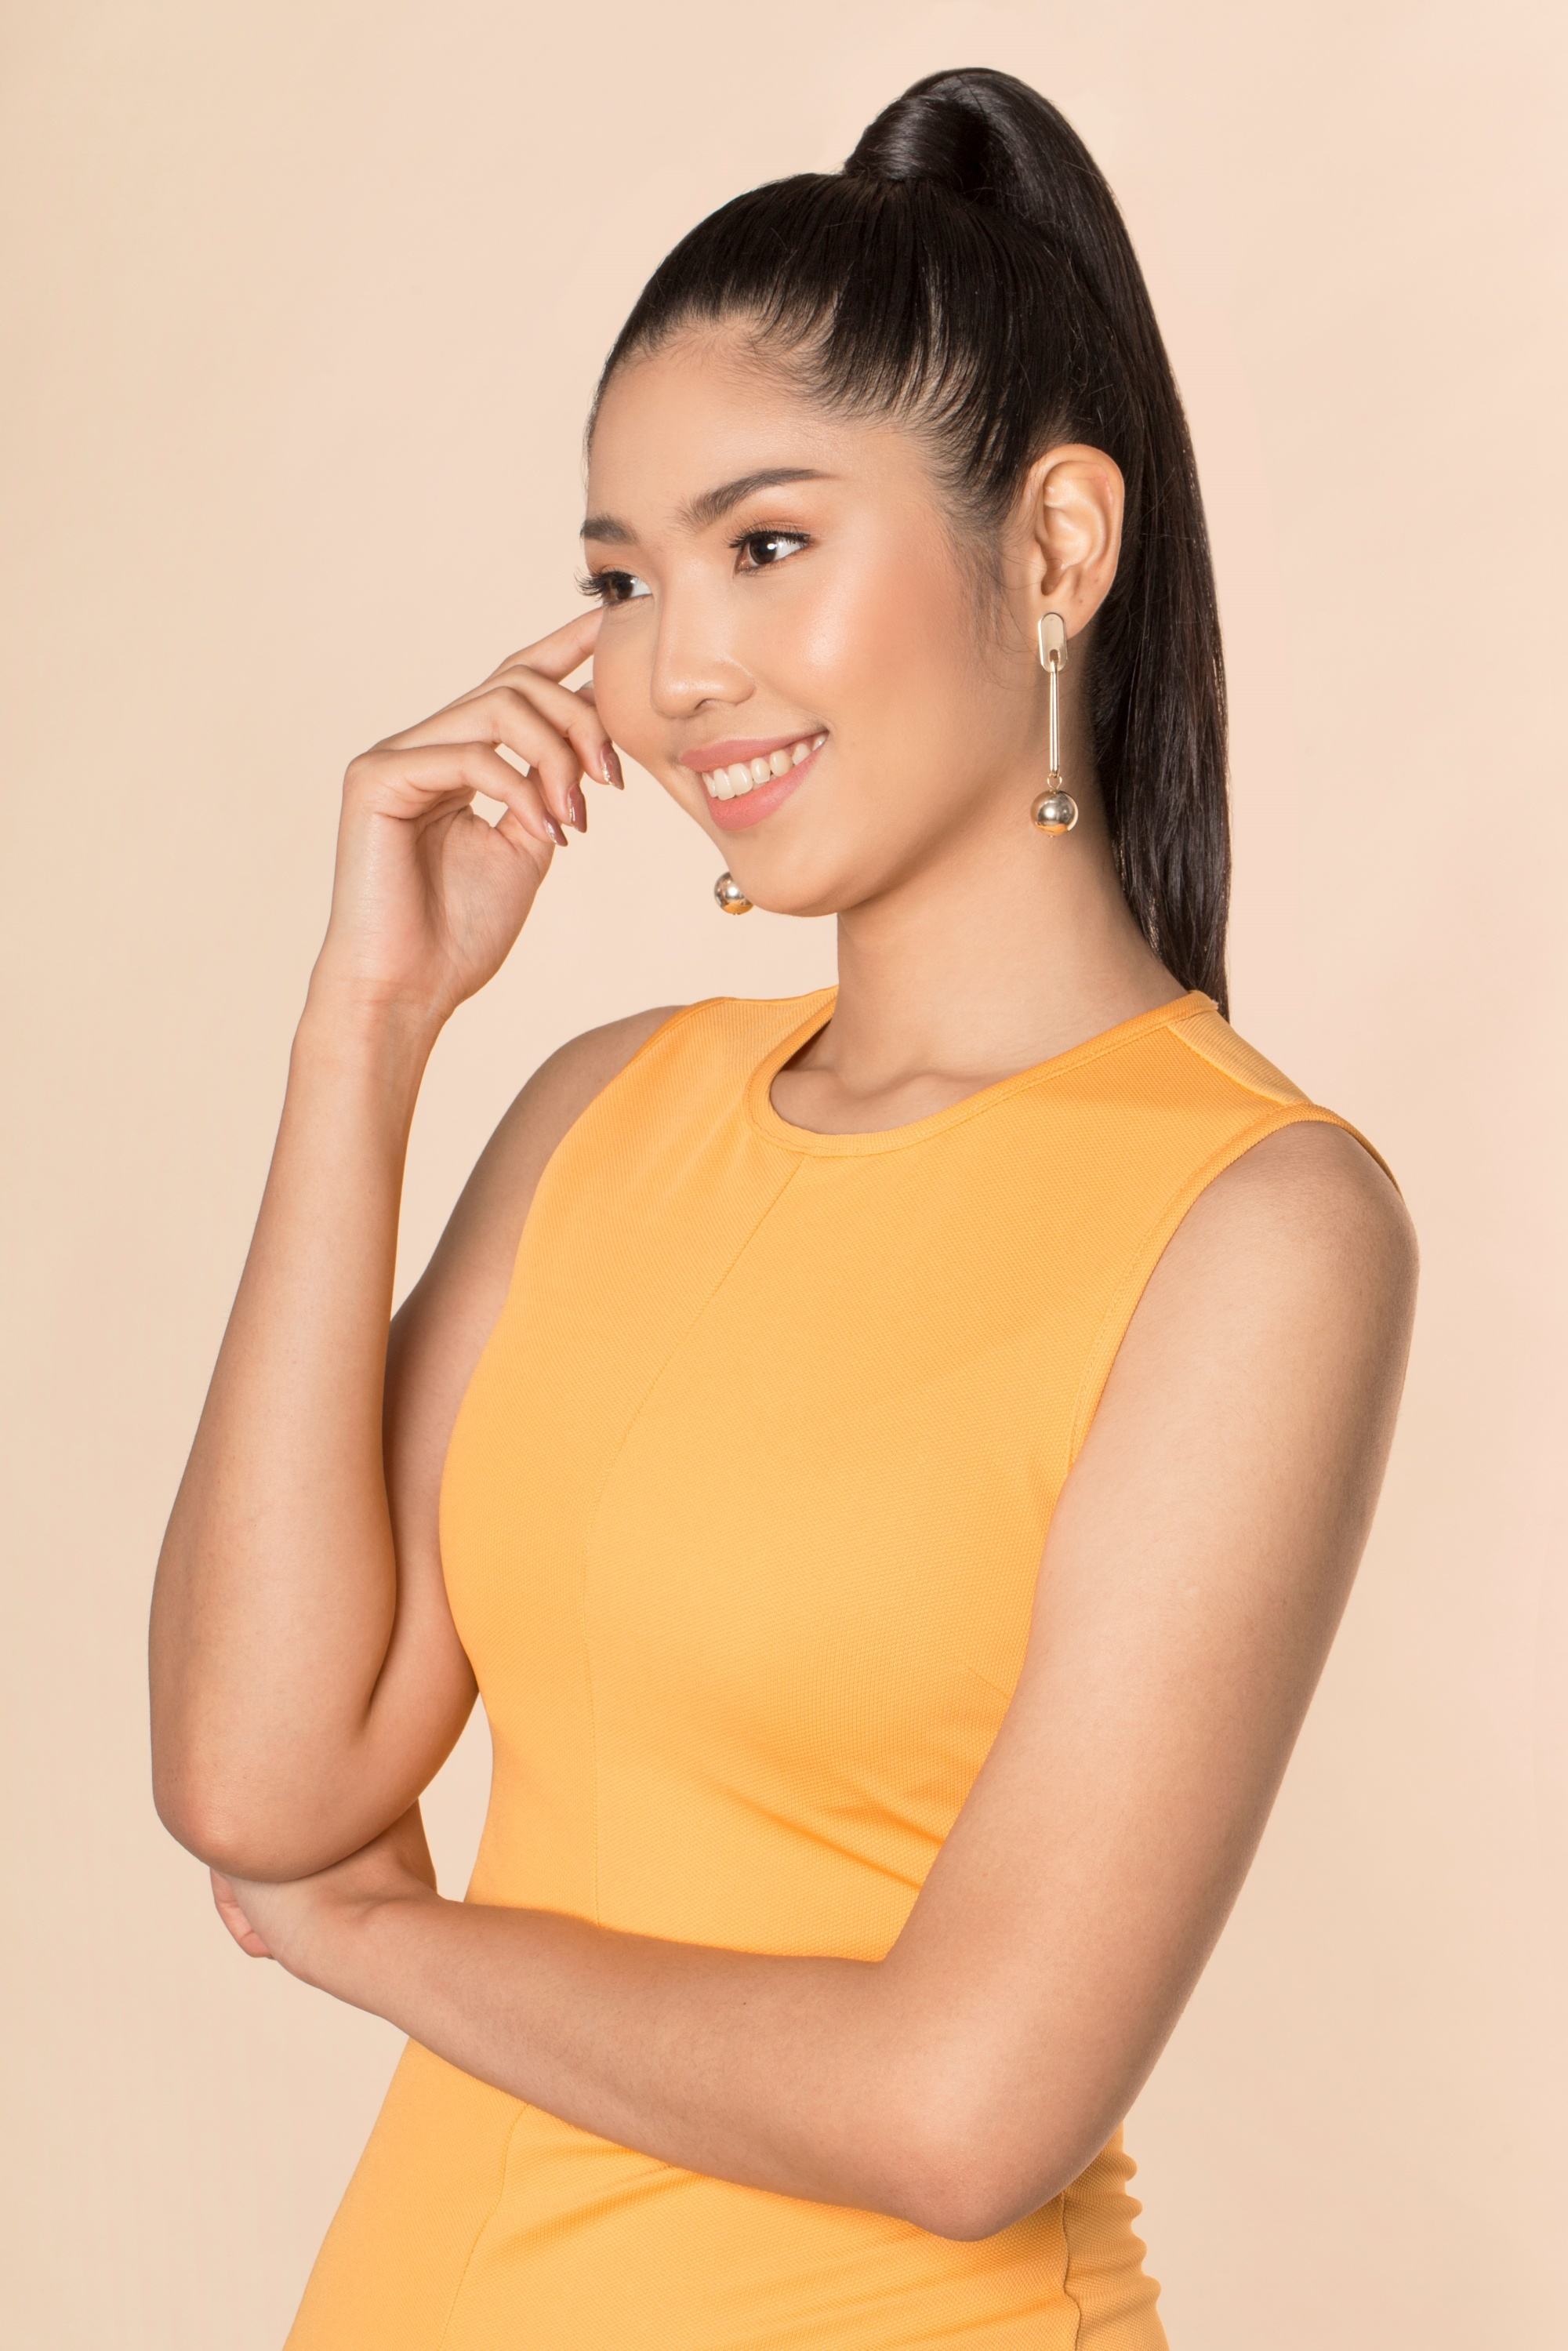 Asian woman with long black hair in a high ponytail wearing a mustard-colored dress